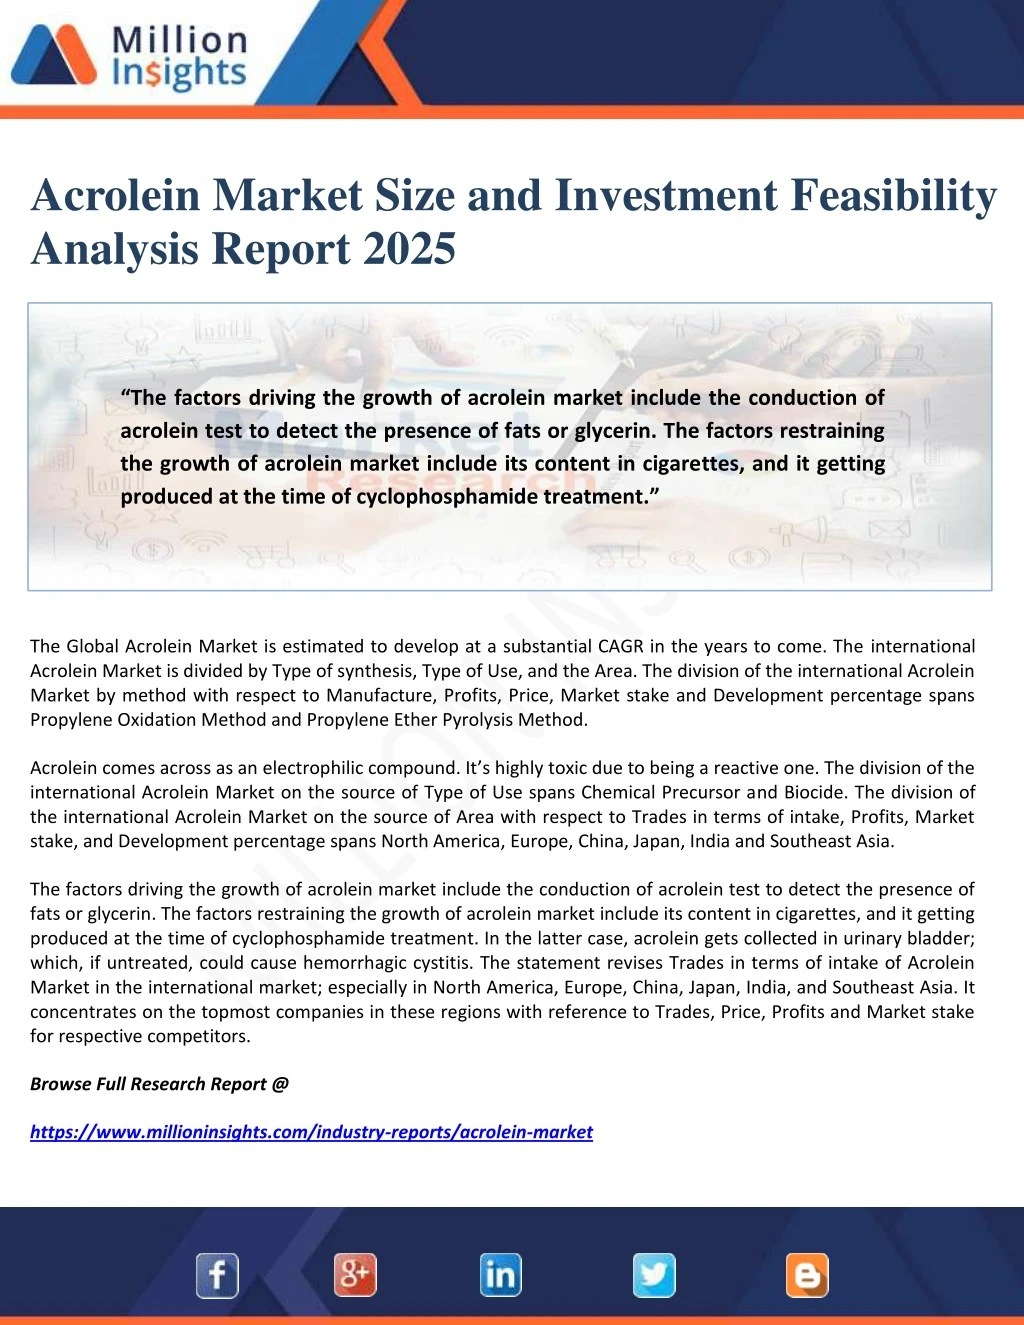 acrolein market size and investment feasibility